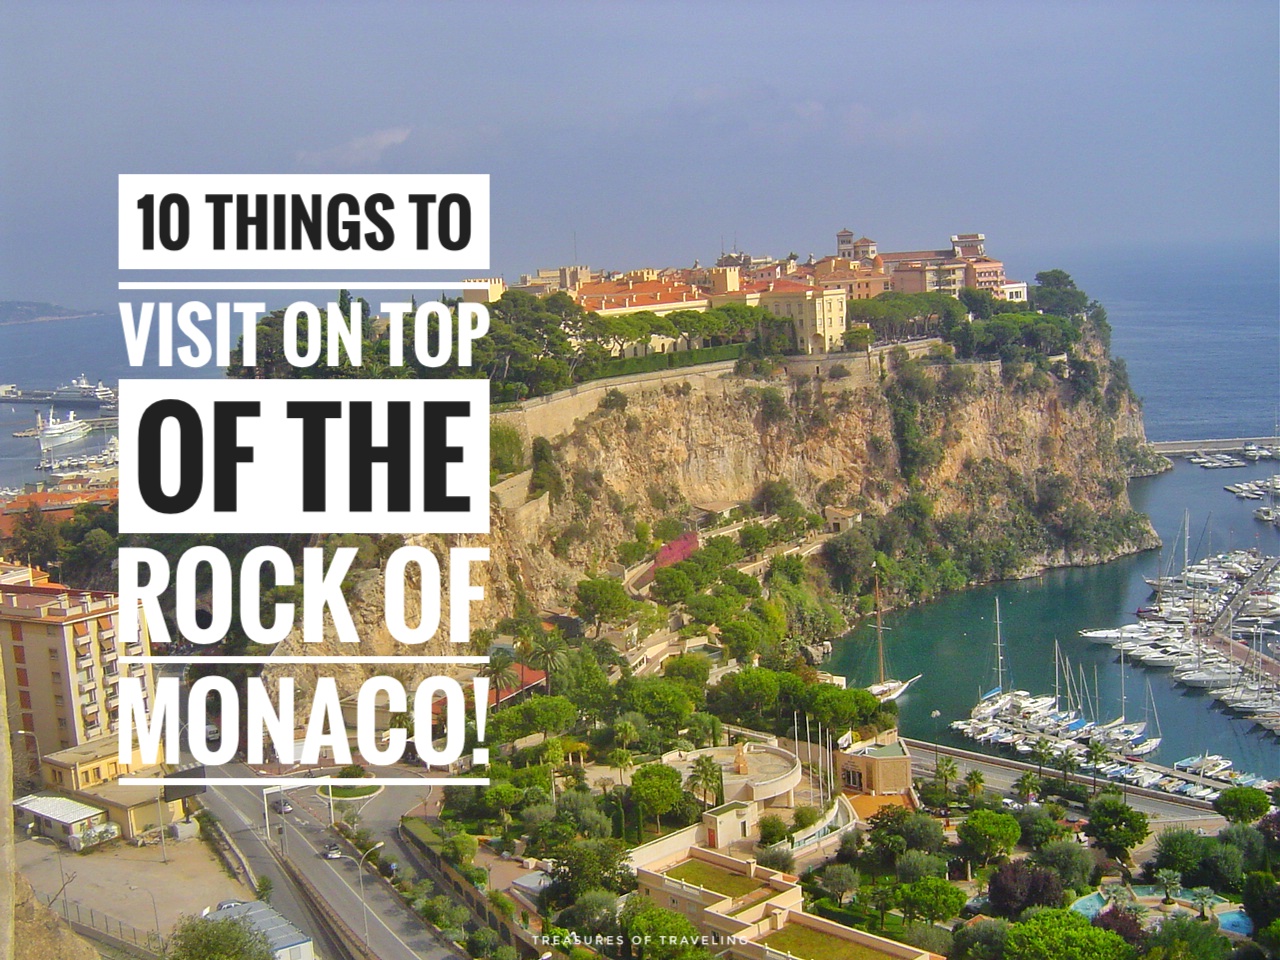 Monaco might be one of the smallest countries in the world, but there are a lot of things to visit on top of the Rock of Monaco. Check out these 10 different places to visit on the top of the rock!